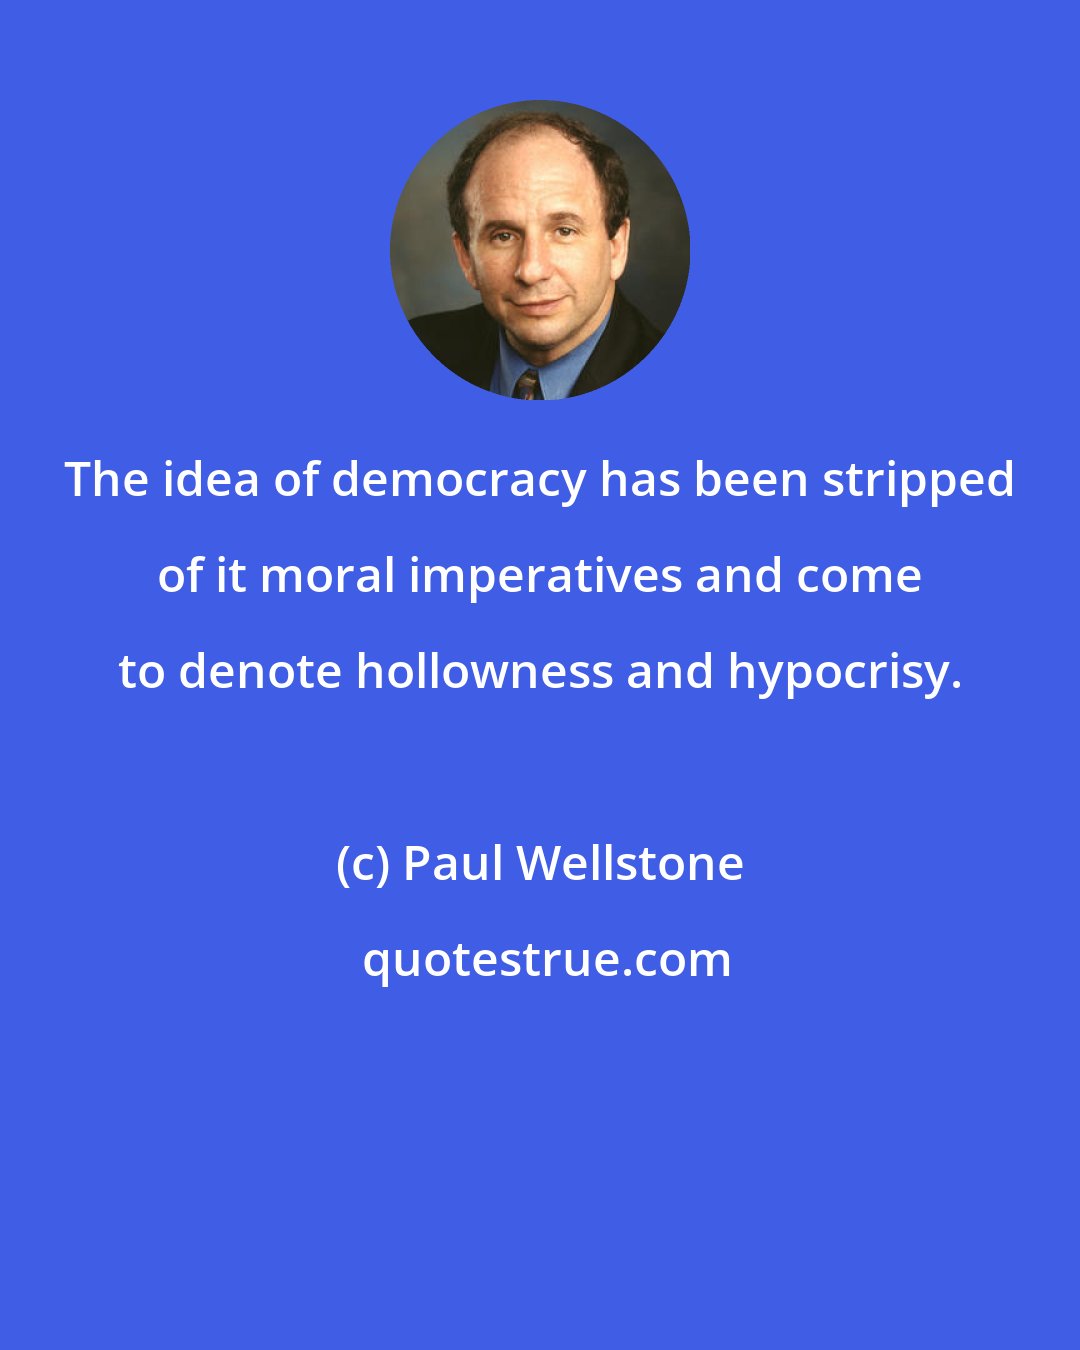 Paul Wellstone: The idea of democracy has been stripped of it moral imperatives and come to denote hollowness and hypocrisy.